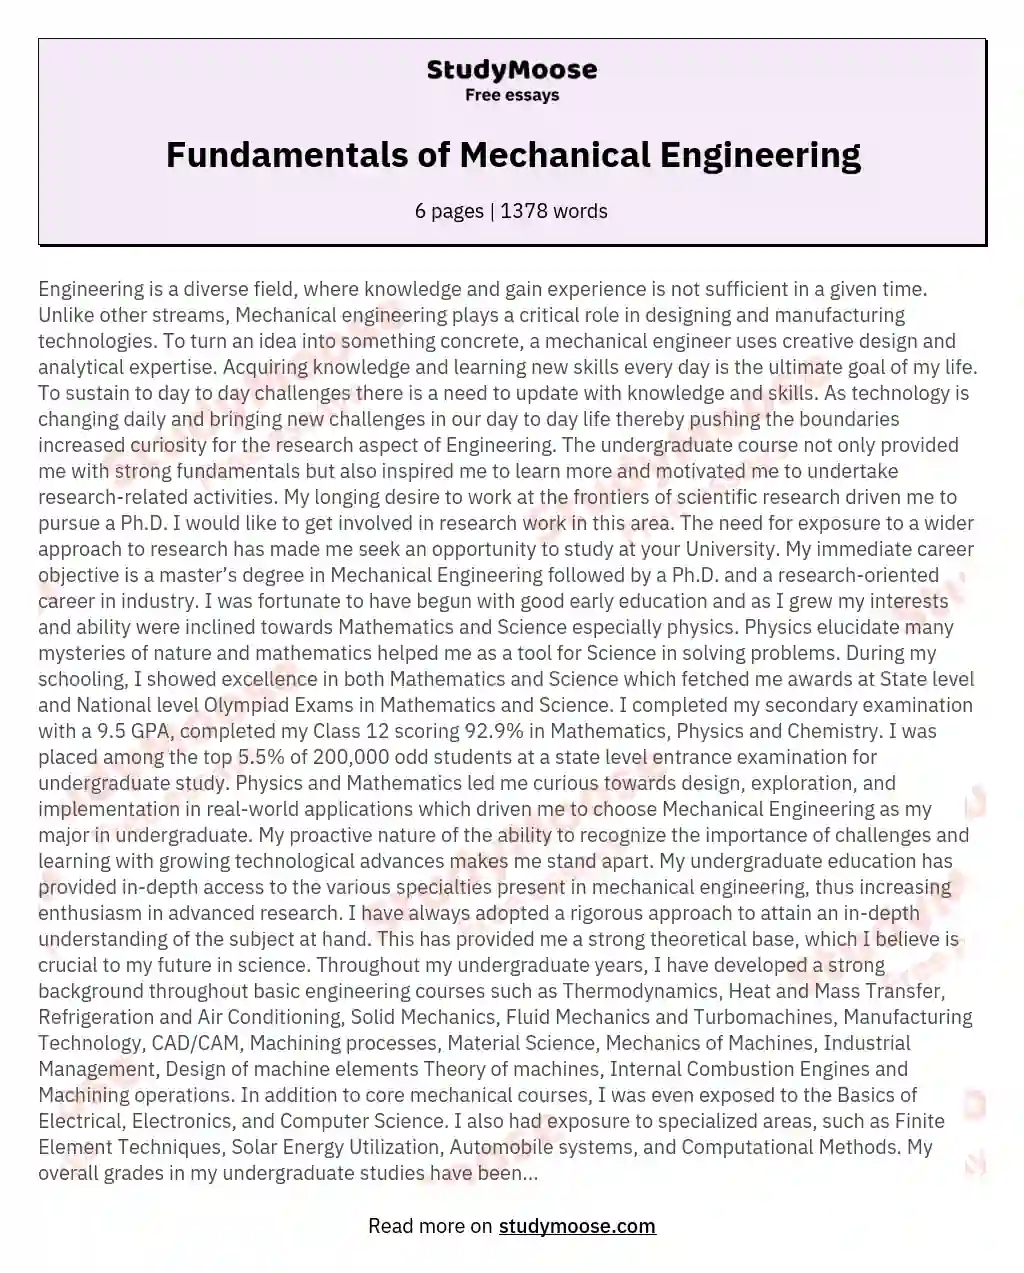 mechanical engineering topics for essays